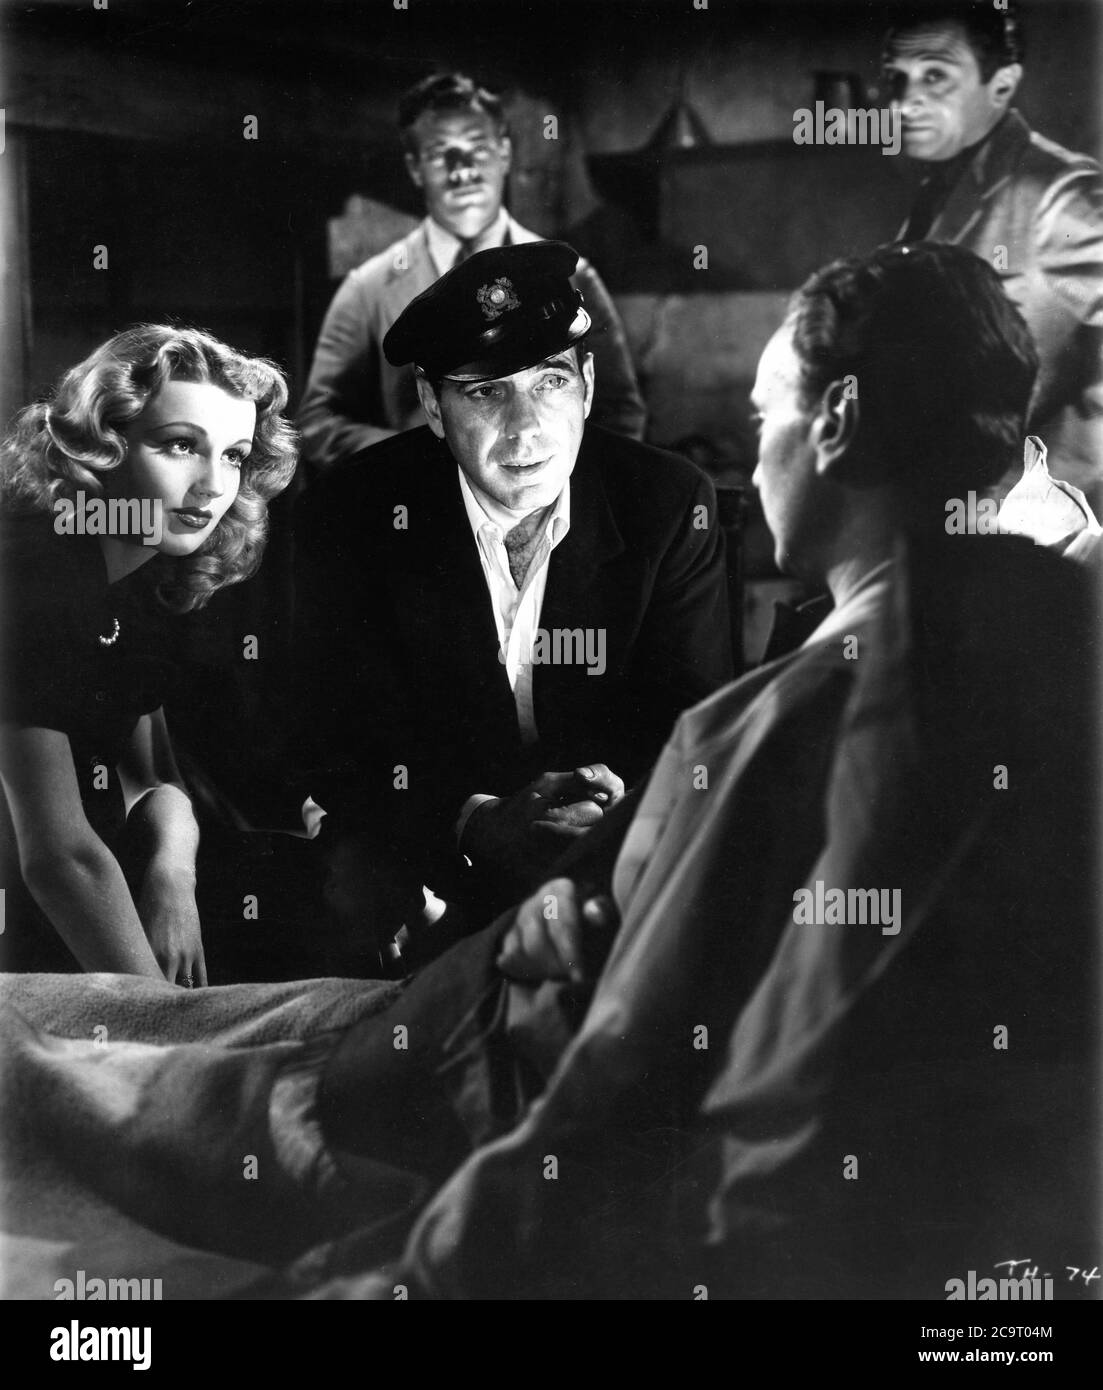 DOLORES MORAN HUMPHREY BOGART WALTER SZUROVY and MARCEL DALIO in TO HAVE AND HAVE NOT 1944 director HOWARD HAWKS novel ERNEST HEMINGWAY screenplay JULES FURTHMAN and WILLIAM FAULKNER Warner Bros. Stock Photo